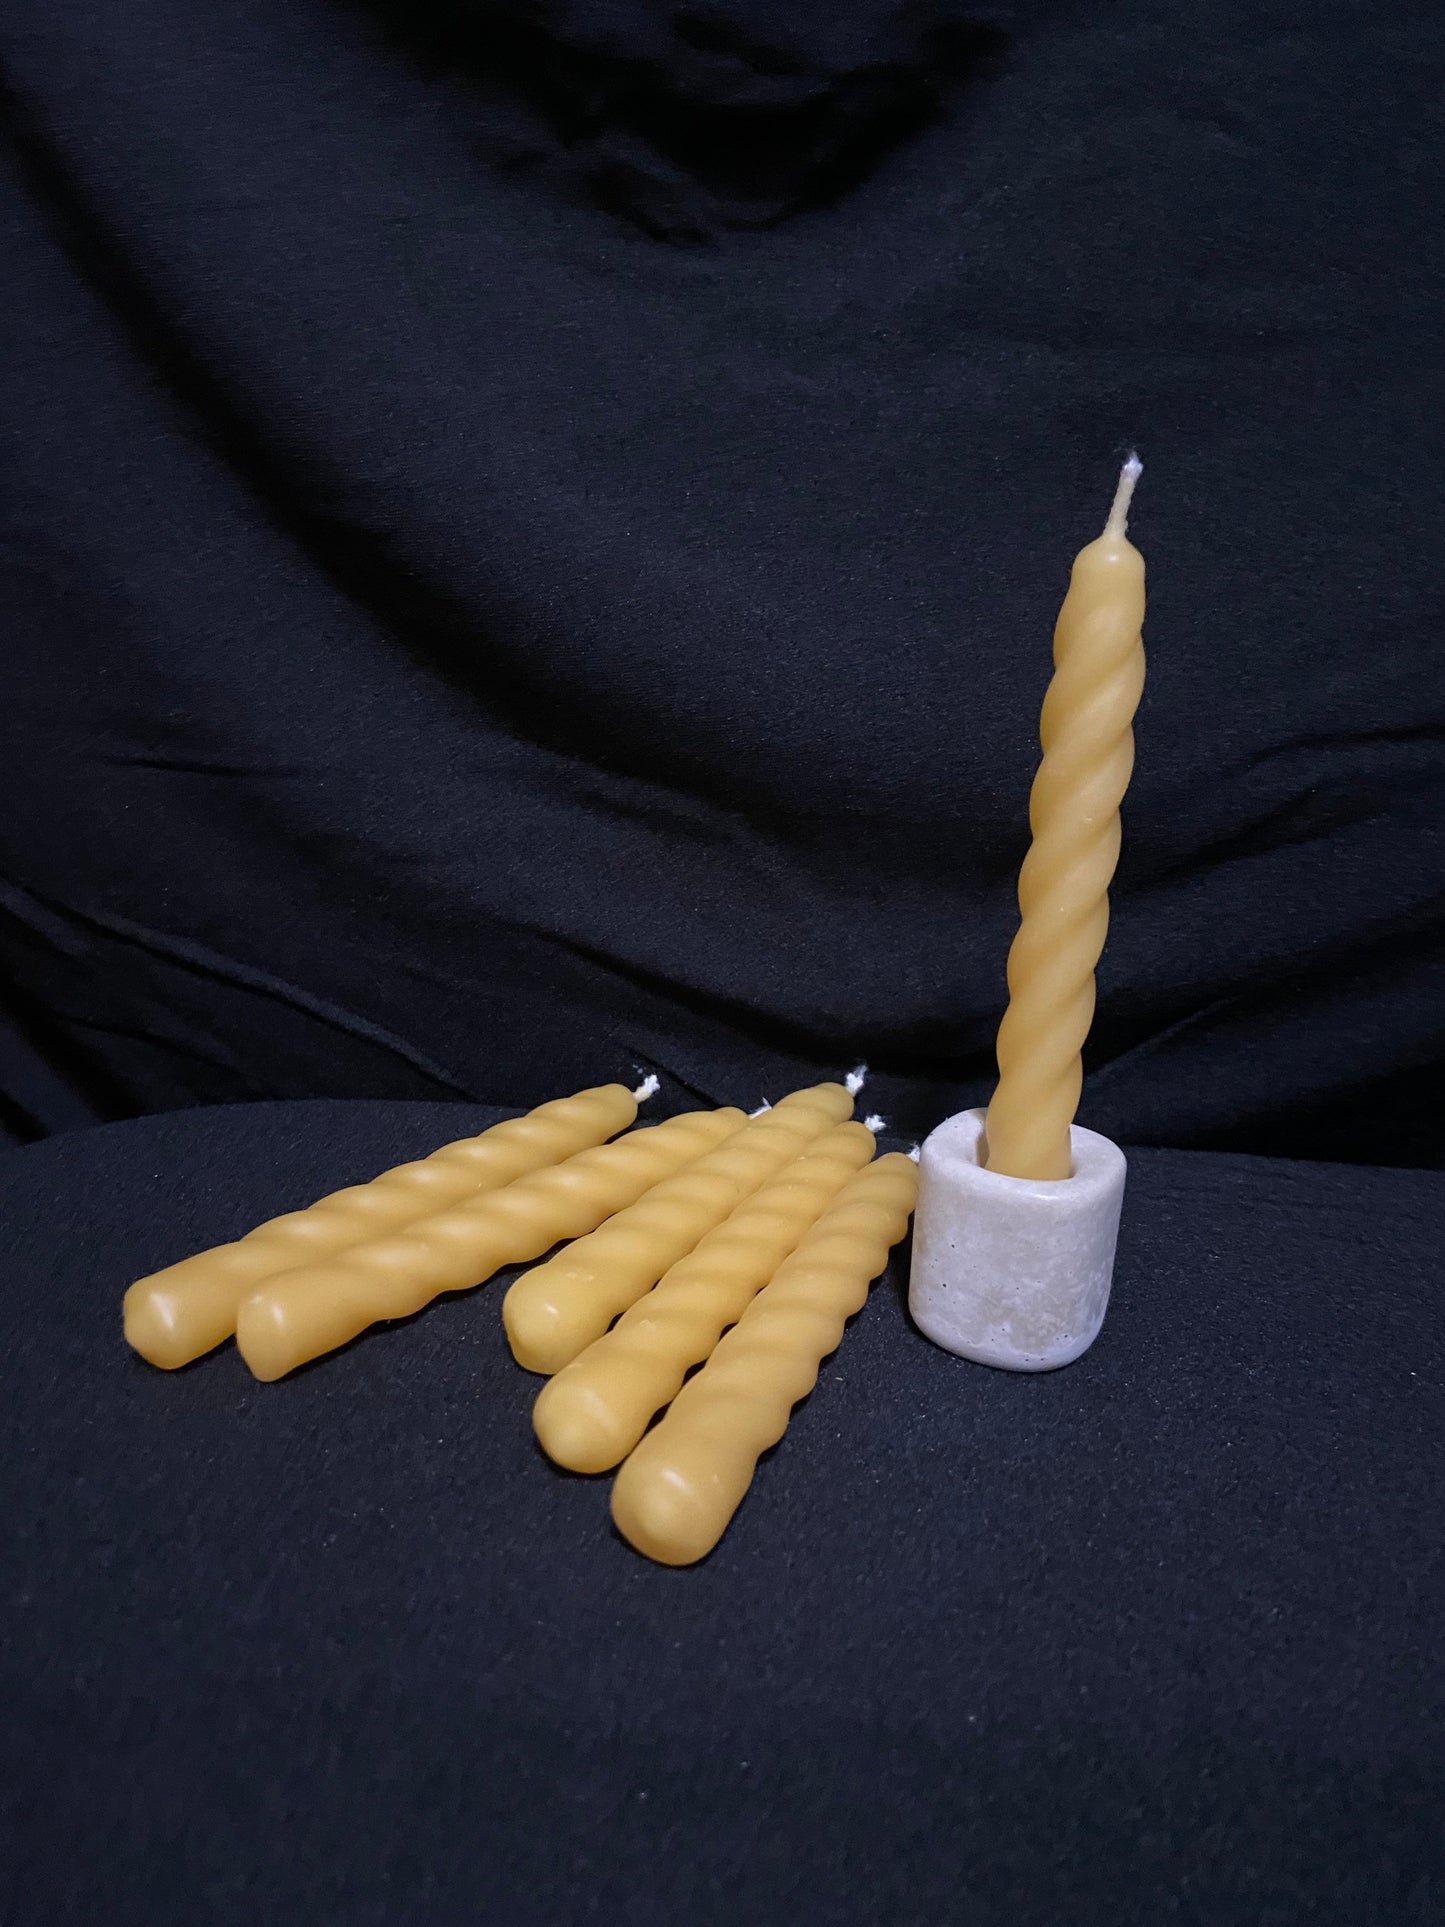 100% Pure Beeswax-Birthday-Celebration-SpiralTapers-Small Tapers-Chime Candles-Prayer-Spell-Meditation-Set of 6